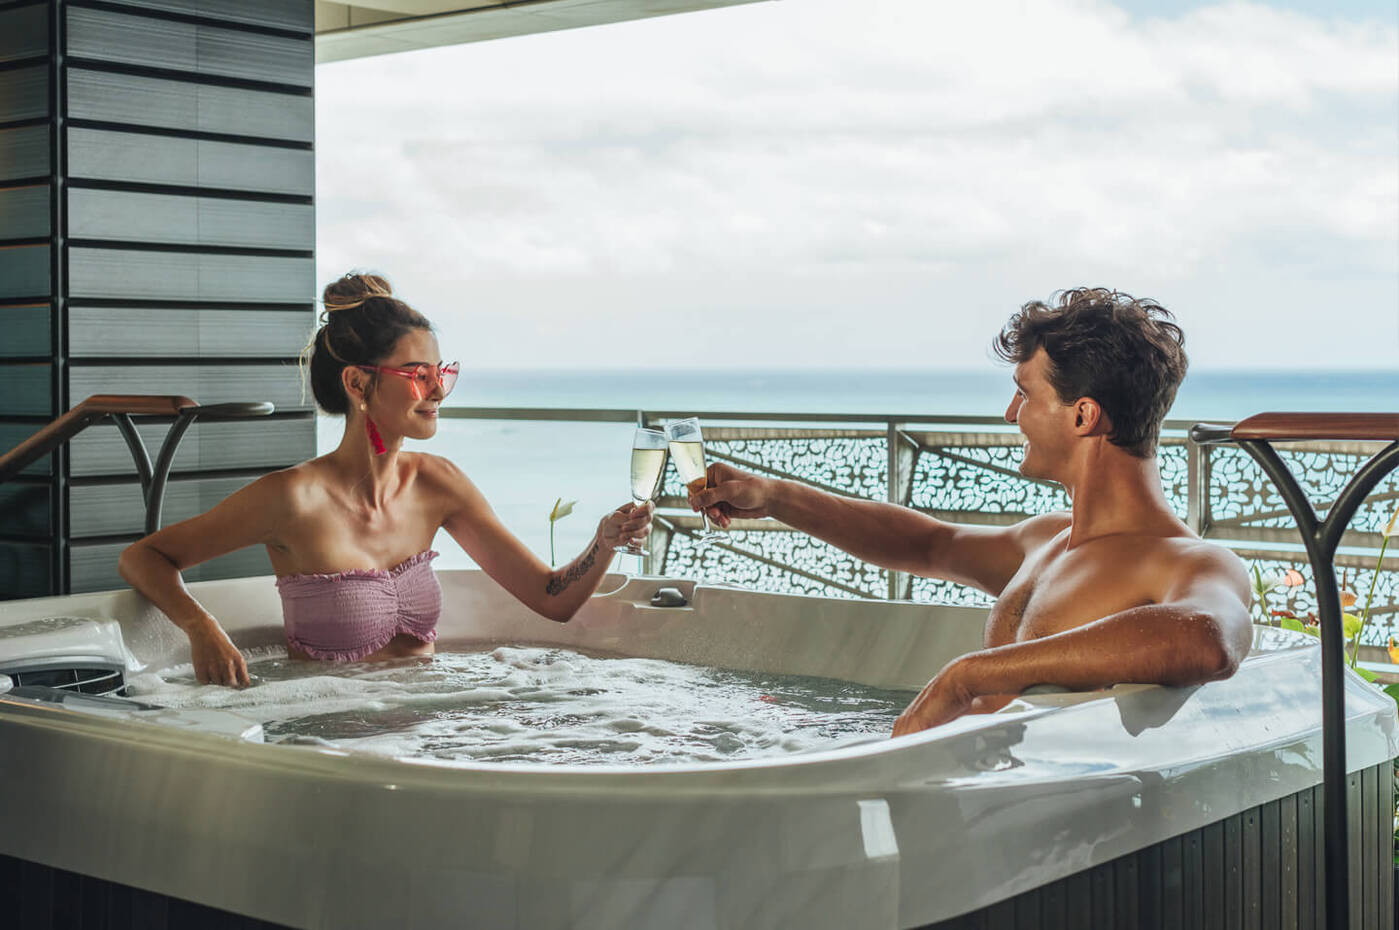 Couple drinking champagne and relaxing in Jacuzzi on balcony